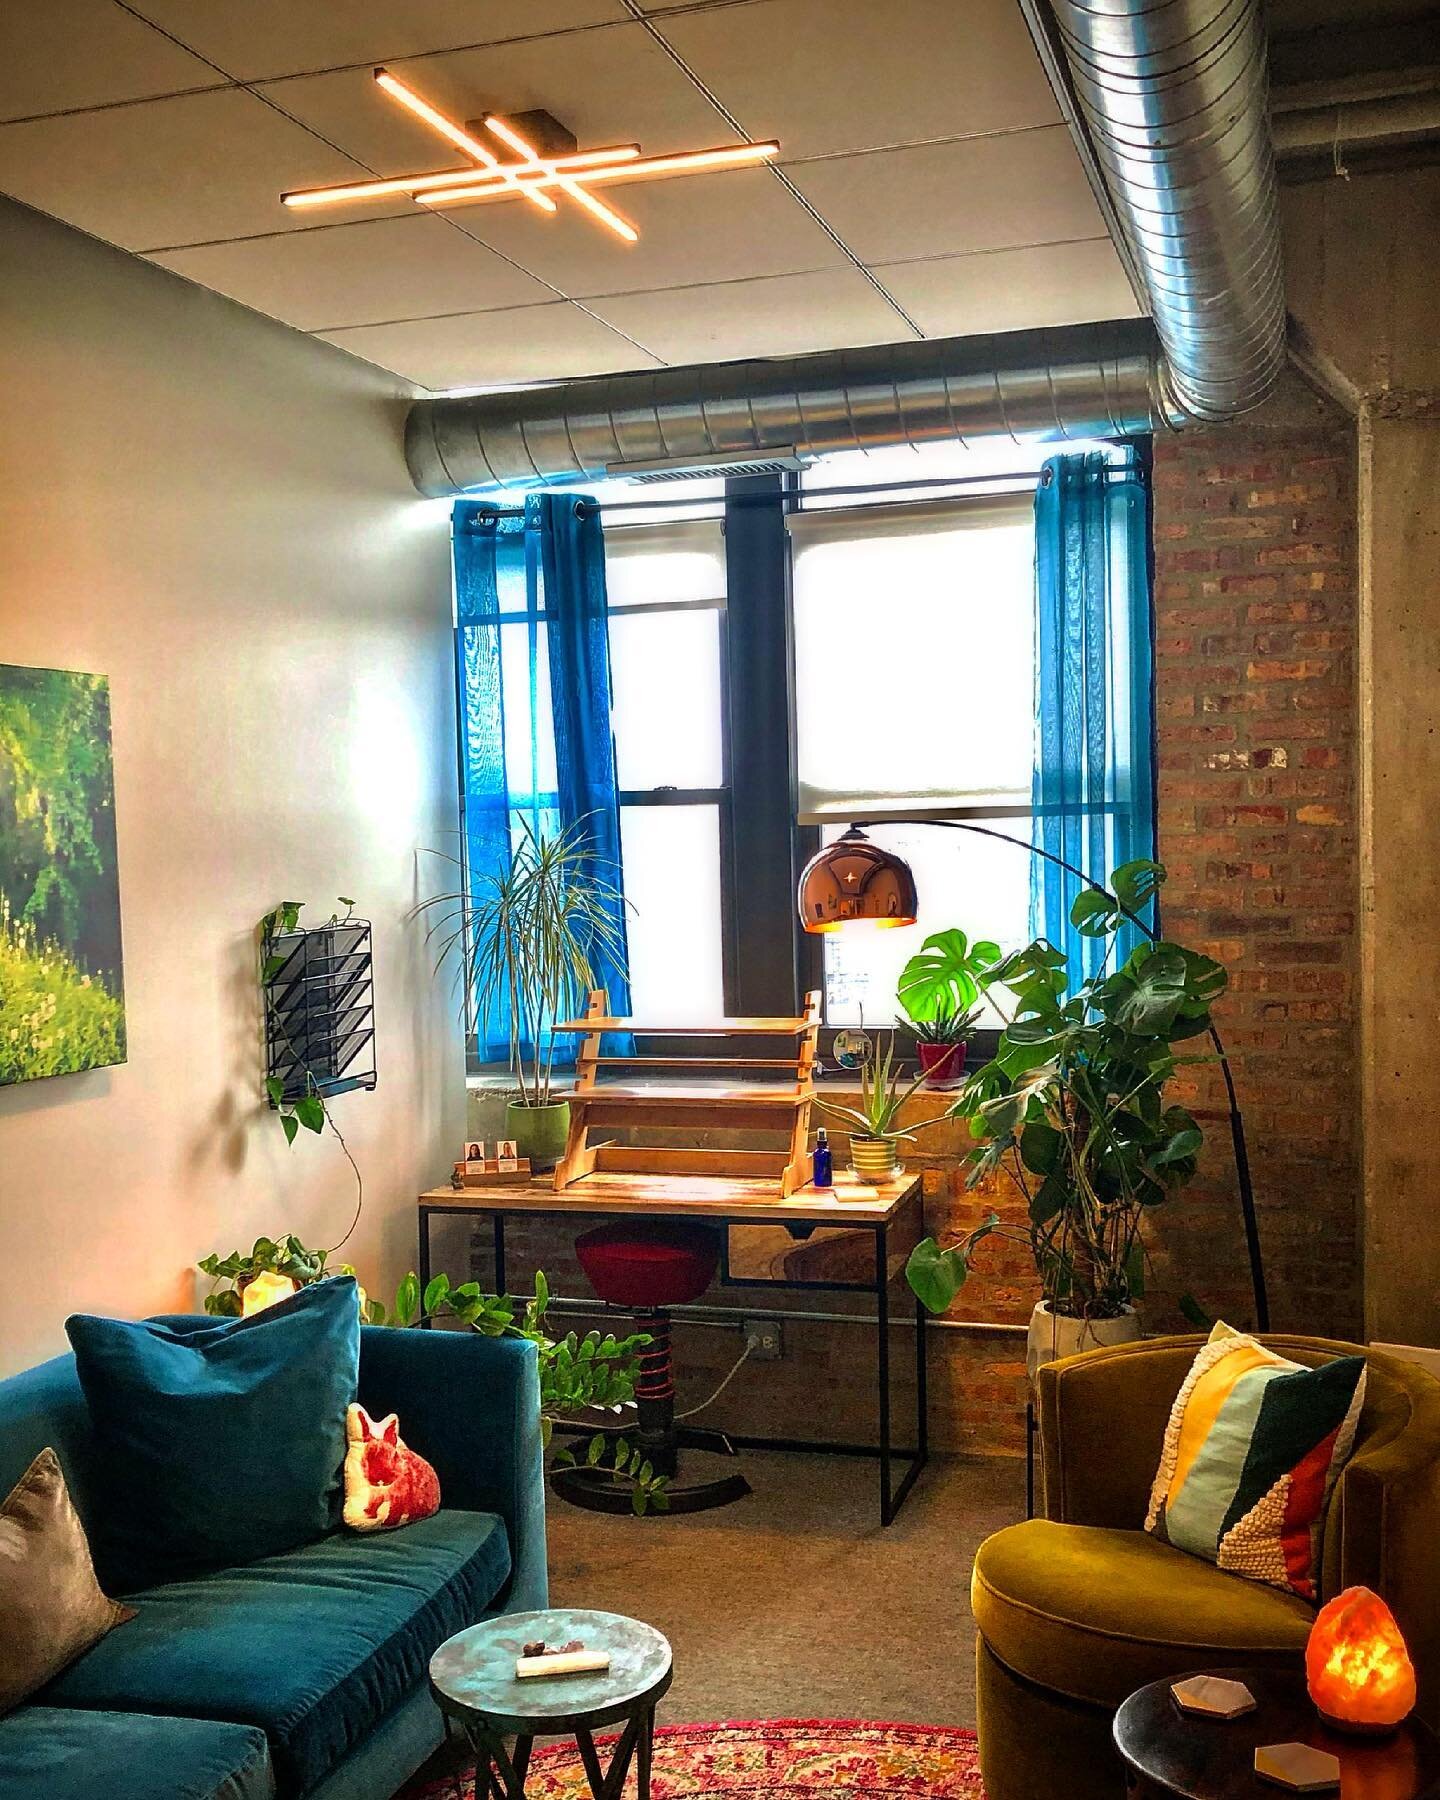 Lighting upgrade! 🤩

Are you ready to feel empowered in your space?

#fengshui #fengshuilifestyle #fengshuiconsultant #fengshuiconsulting #lifecoachforwomen #businessconsultant #empoweringwomen #officedesign #therapyoffice #chicagooffice